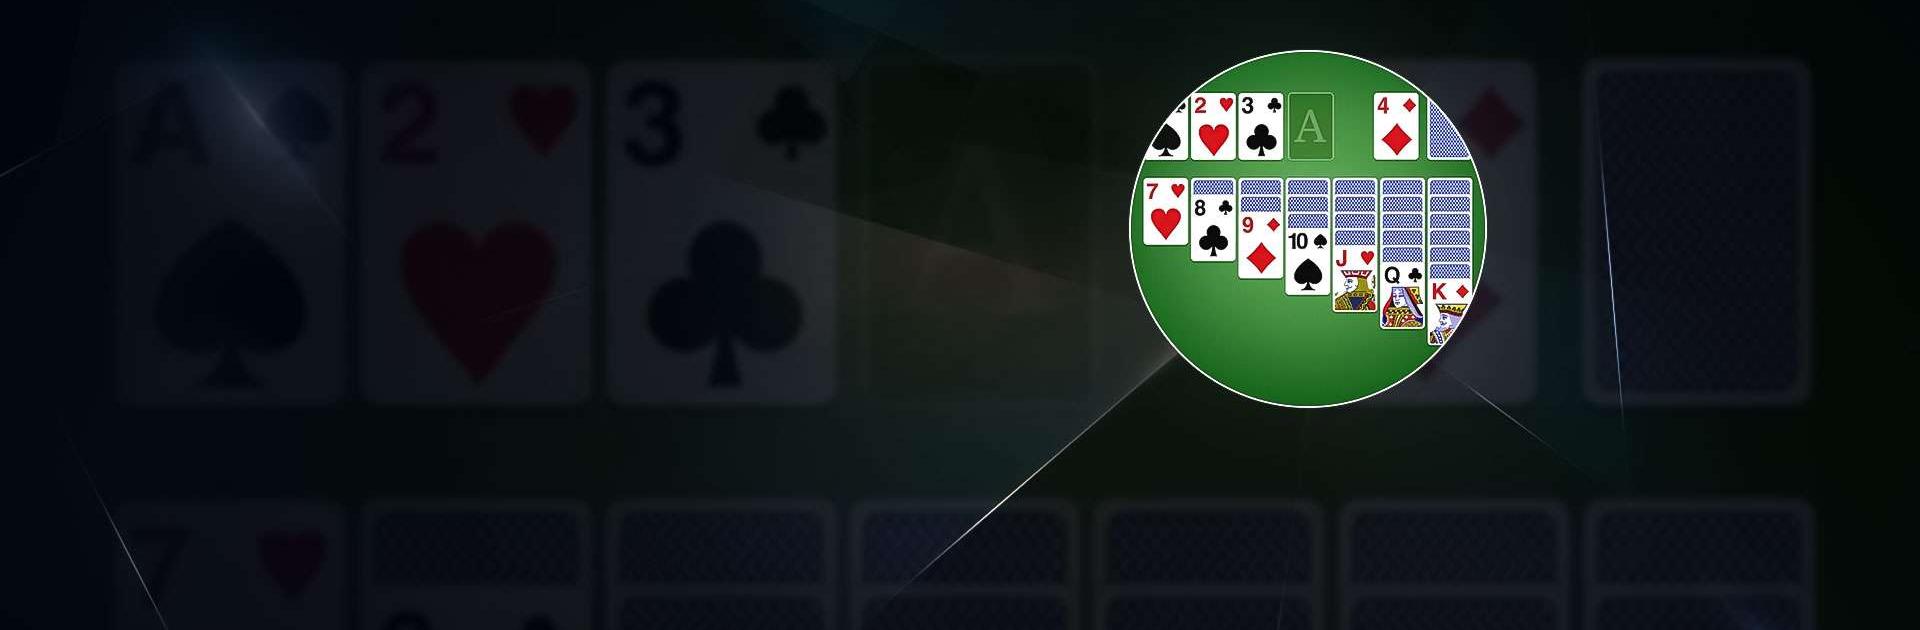 Play Solitaire - Classic Card Games Online